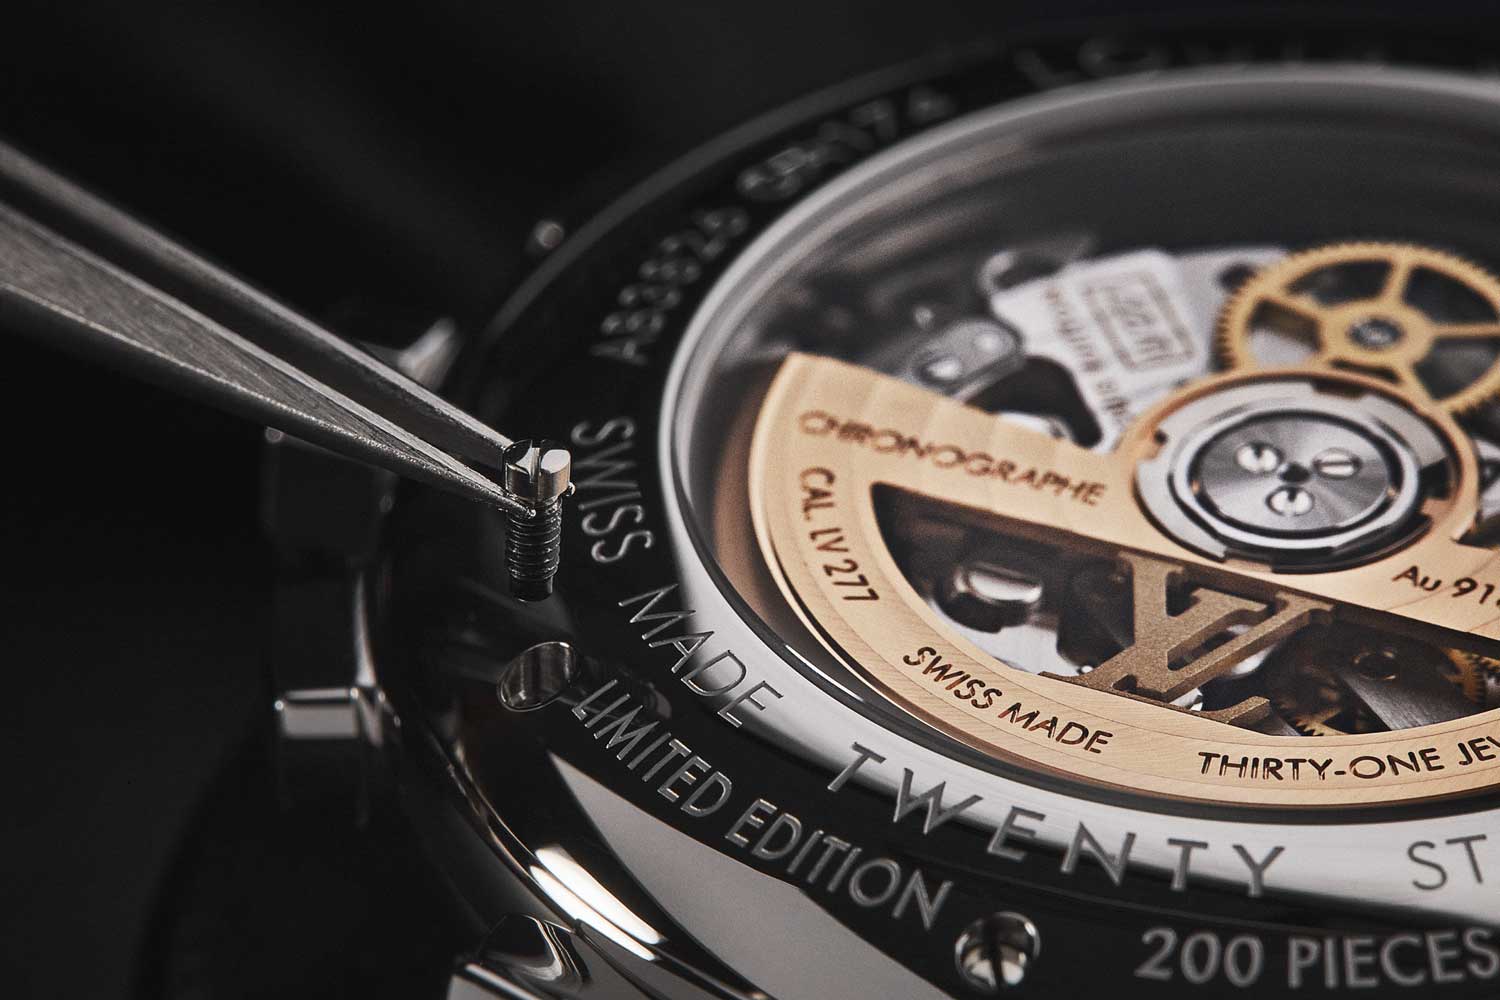 The limited edition of 200 pieces is engraved on the caseback along with Swiss-made designation